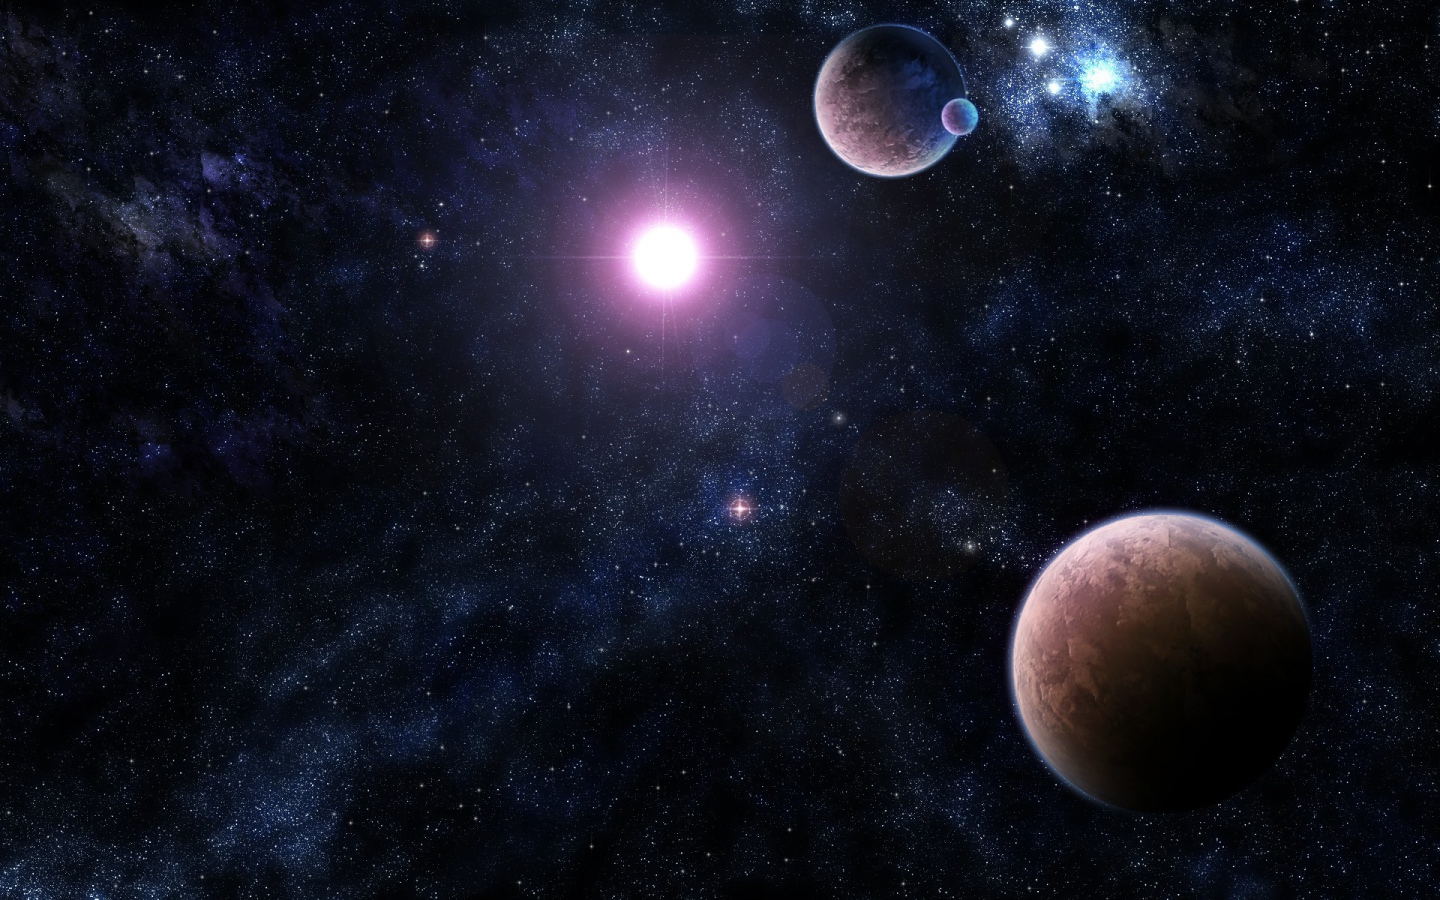 Star's planetary system